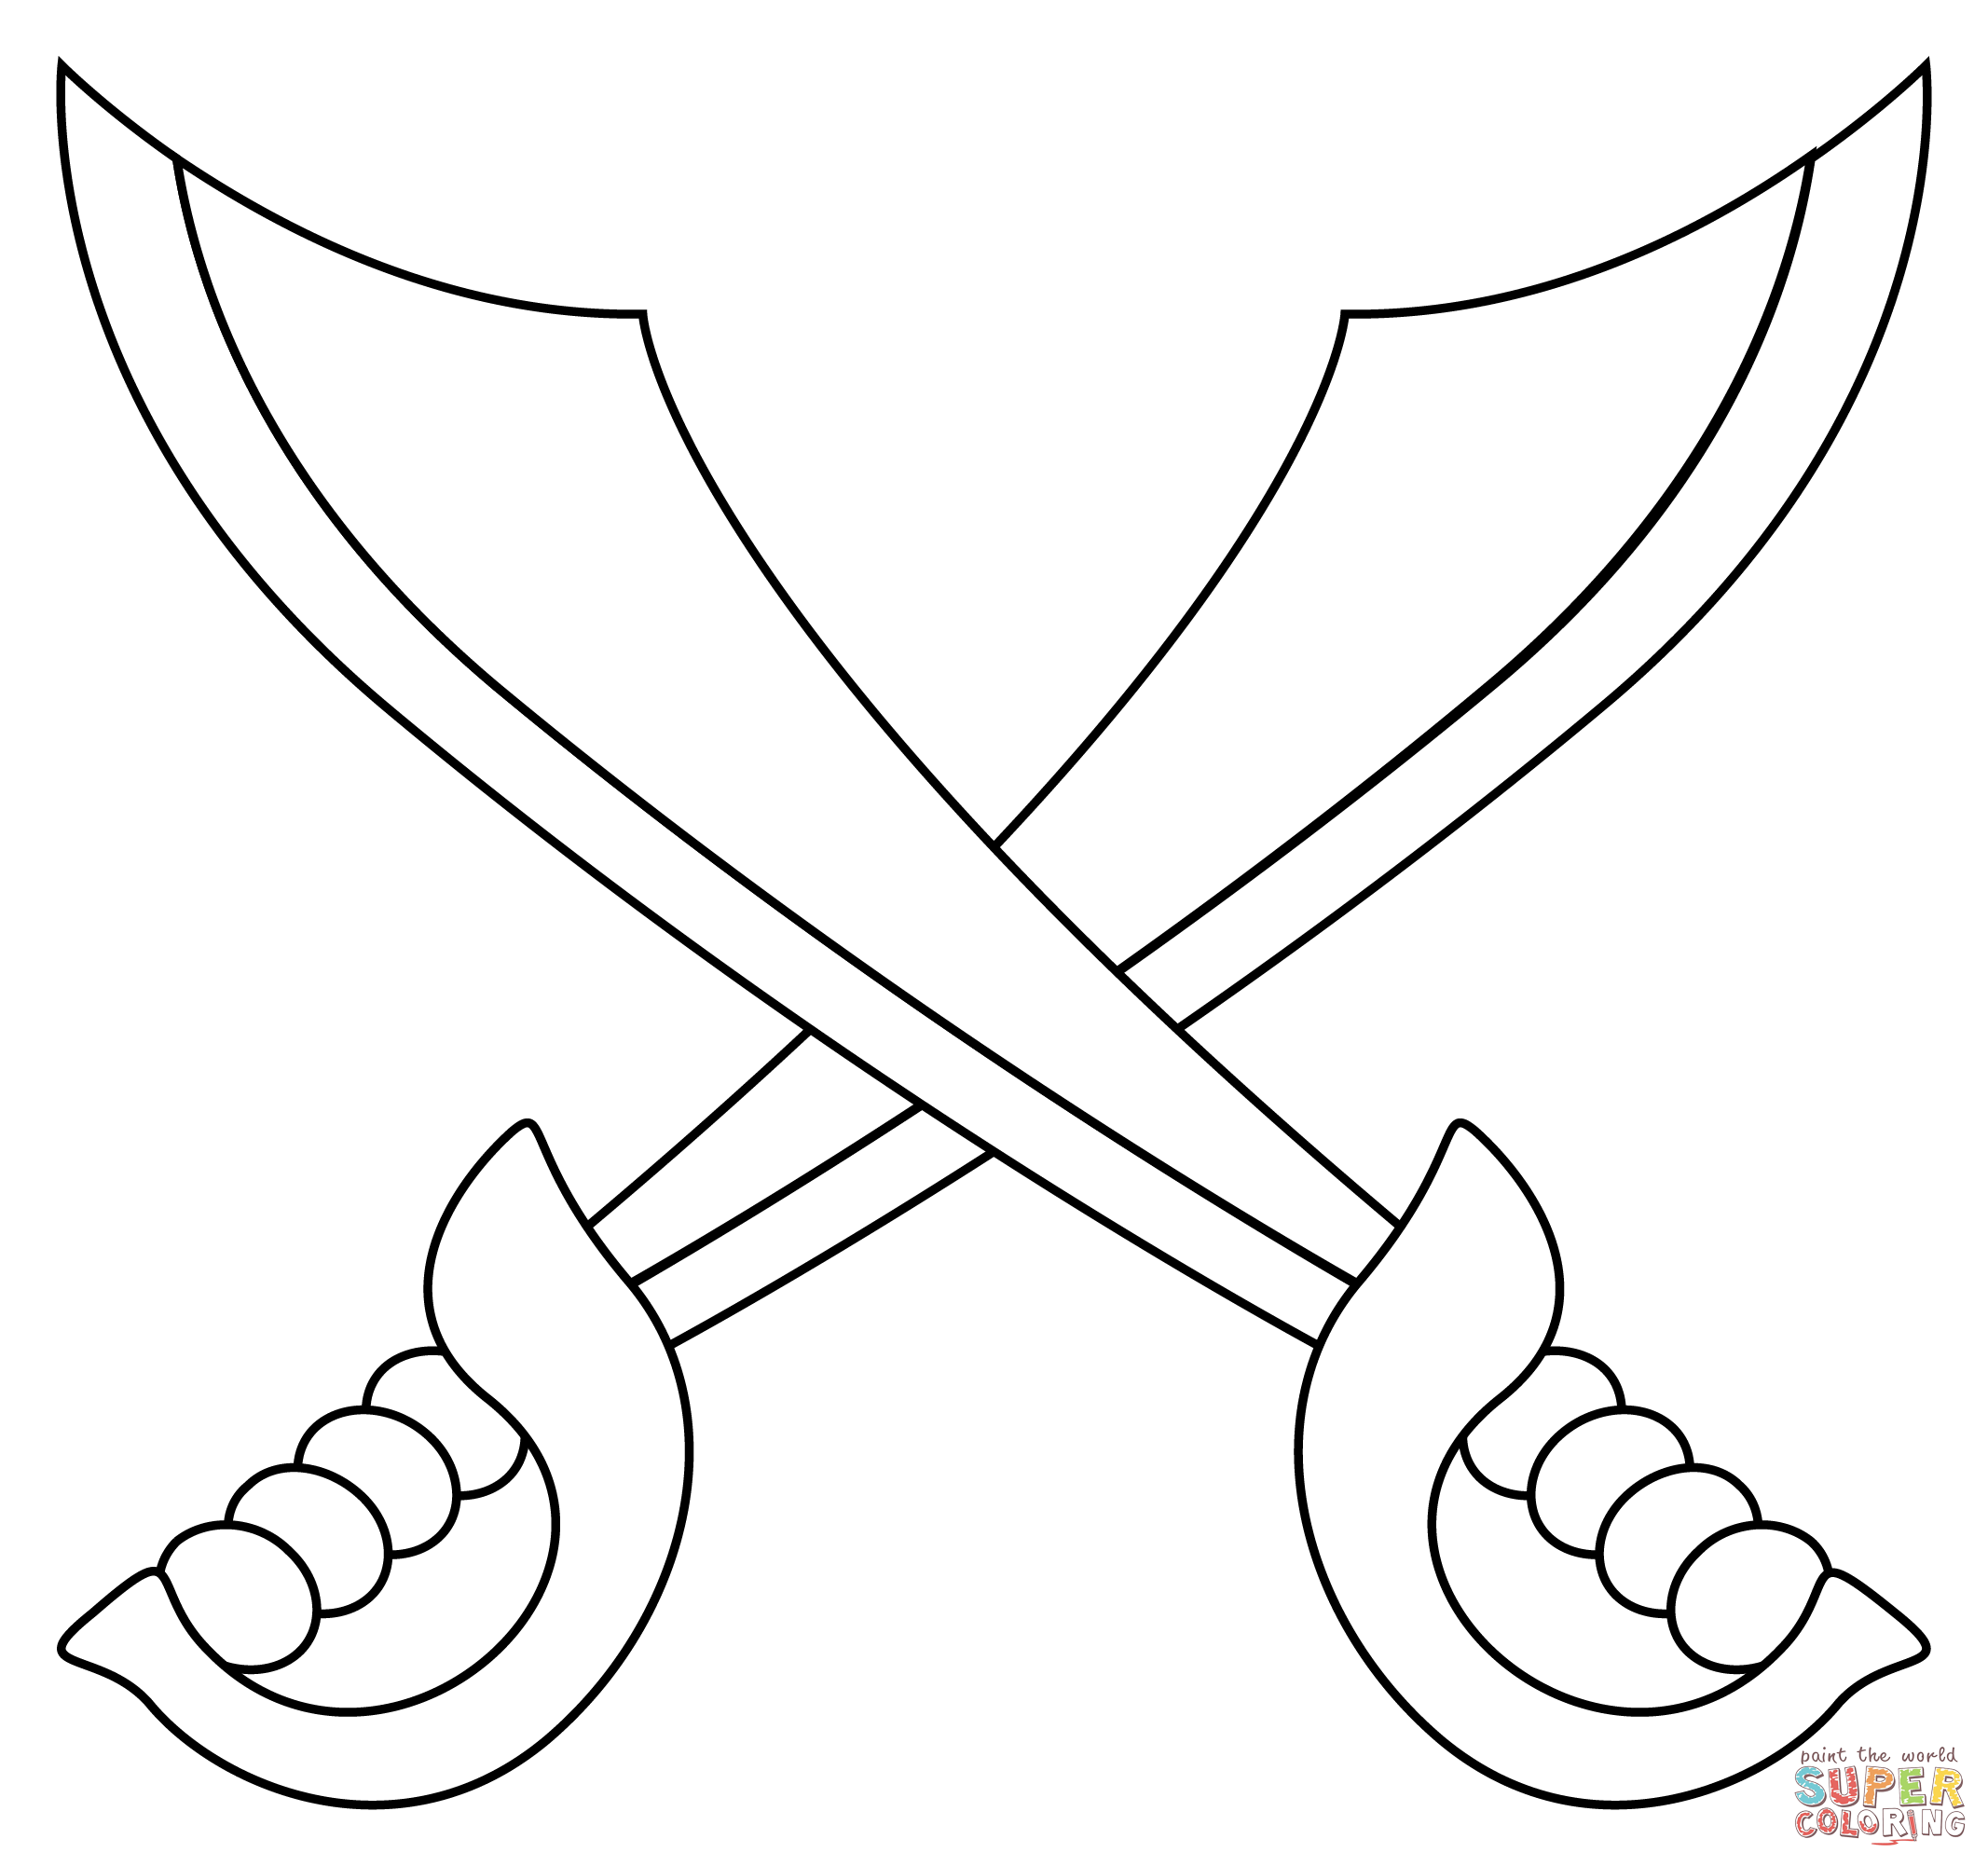 Crossed swords coloring page free printable coloring pages